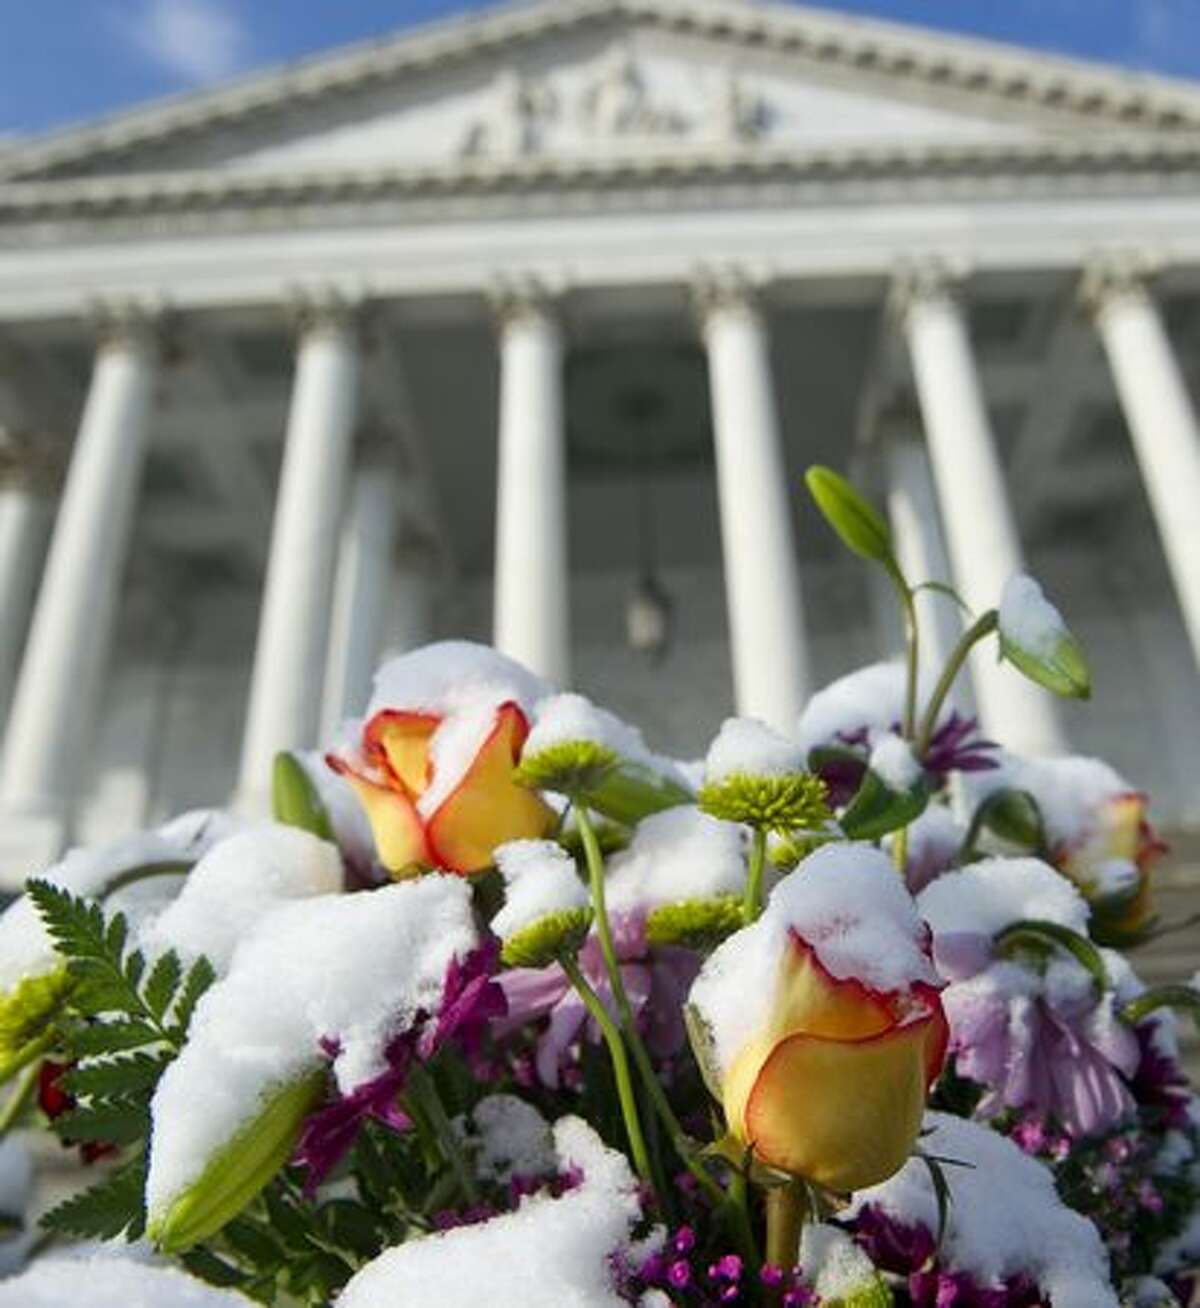 A layer of snow covers flowers left as part of a makeshift memorial on the East Front of the US Capitol in Washington, DC, Wednesday, in honor of the six people killed in the shooting in Tucson, Arizona, that also severely wounded Arizona Representative Gabrielle Giffords. US President Barack Obama is scheduled to travel to Tucson later today to attend a memorial service.